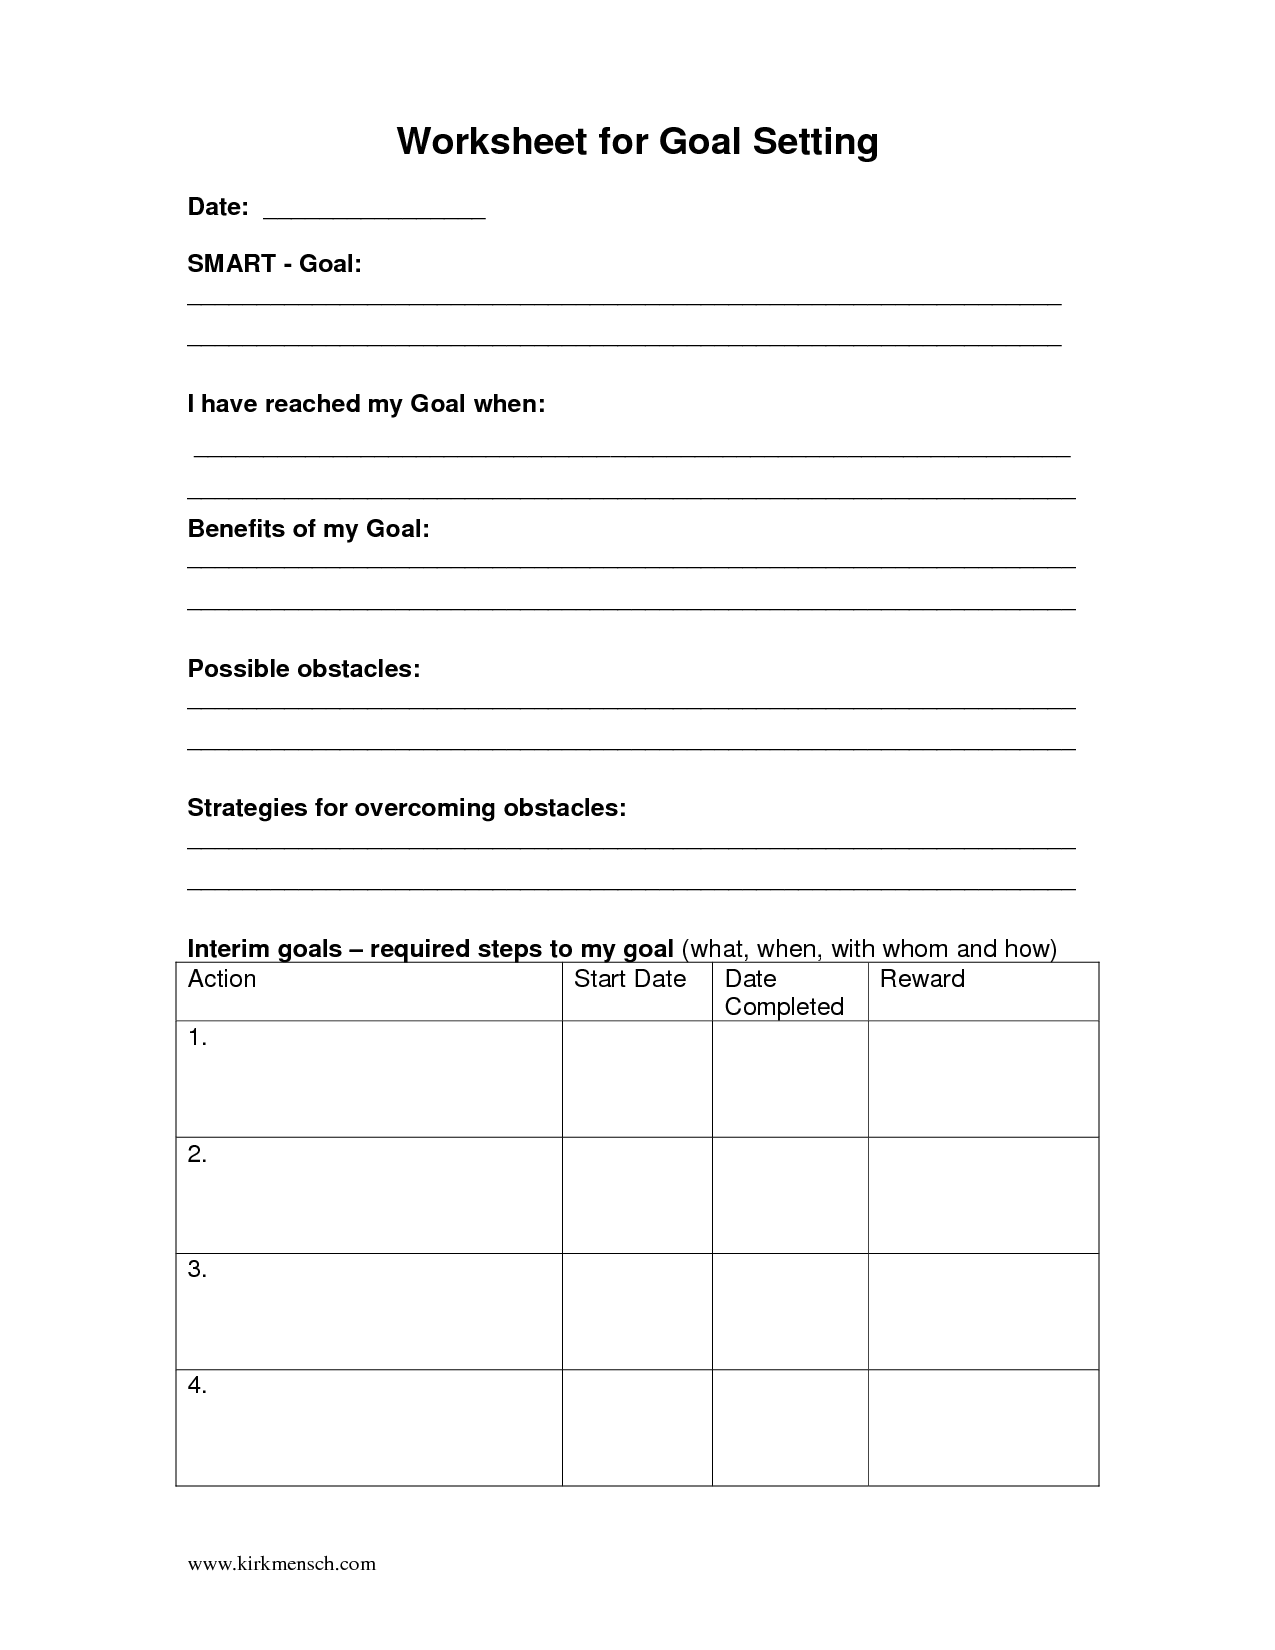 Templates for Sales Goal Setting Worksheets